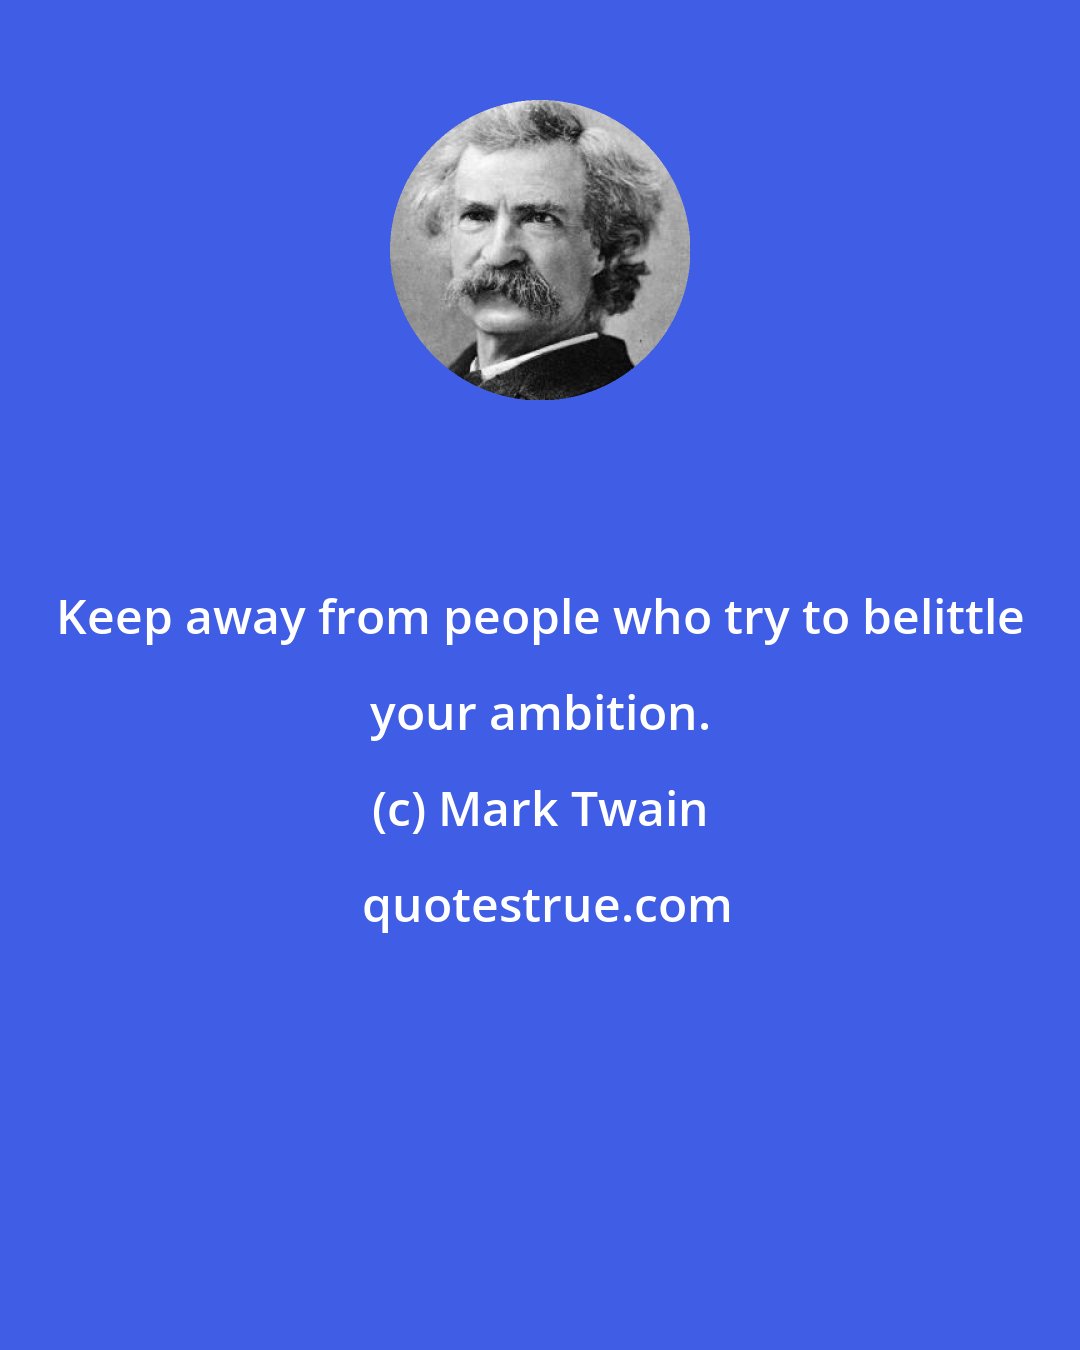 Mark Twain: Keep away from people who try to belittle your ambition.